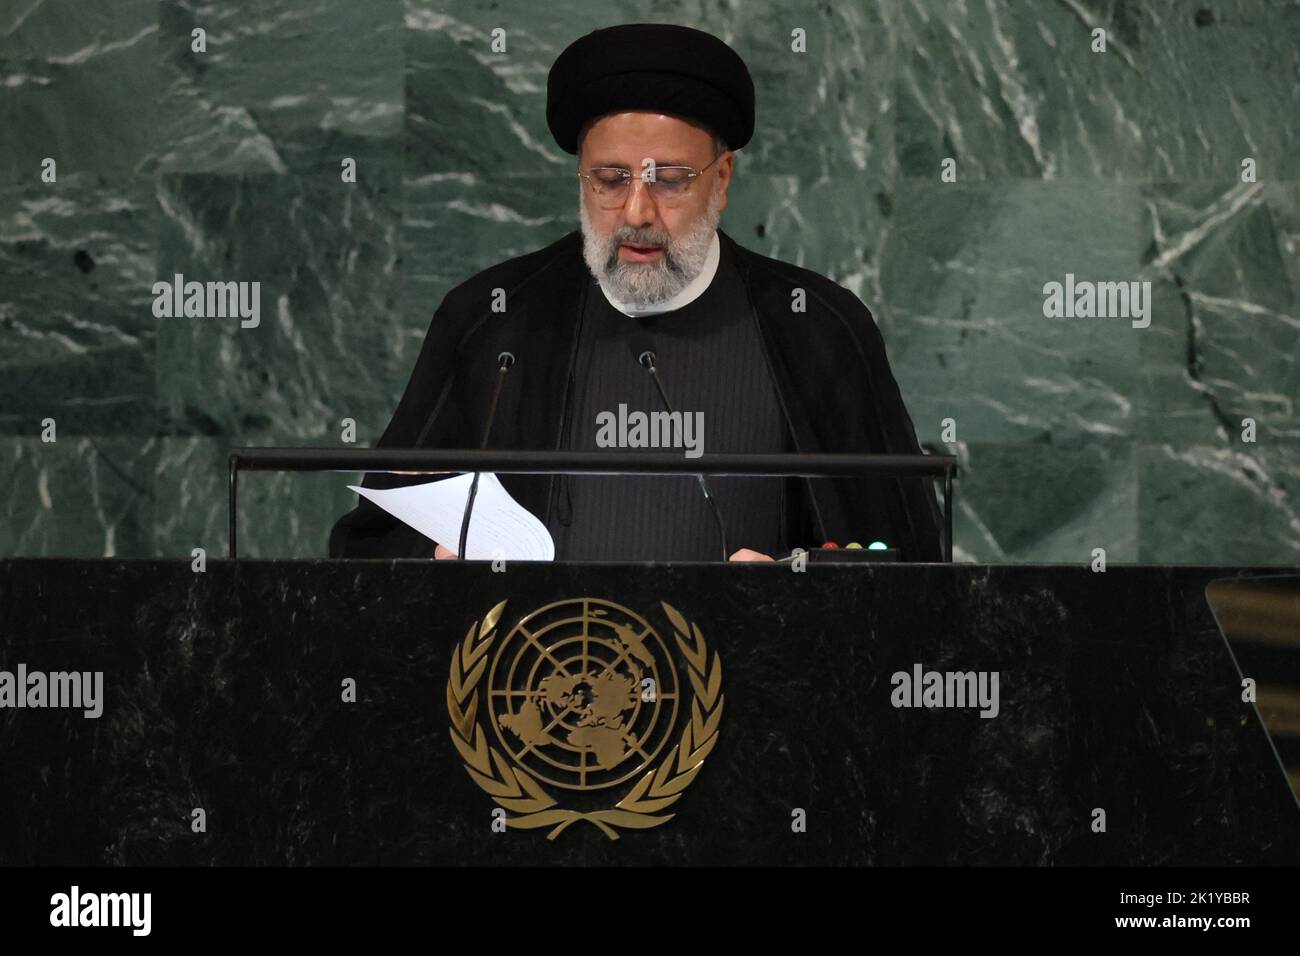 Iran's President Ebrahim Raisi addresses the 77th Session of the United Nations General Assembly at U.N. Headquarters in New York City, U.S., September 21, 2022. REUTERS/Brendan McDermid Stock Photo